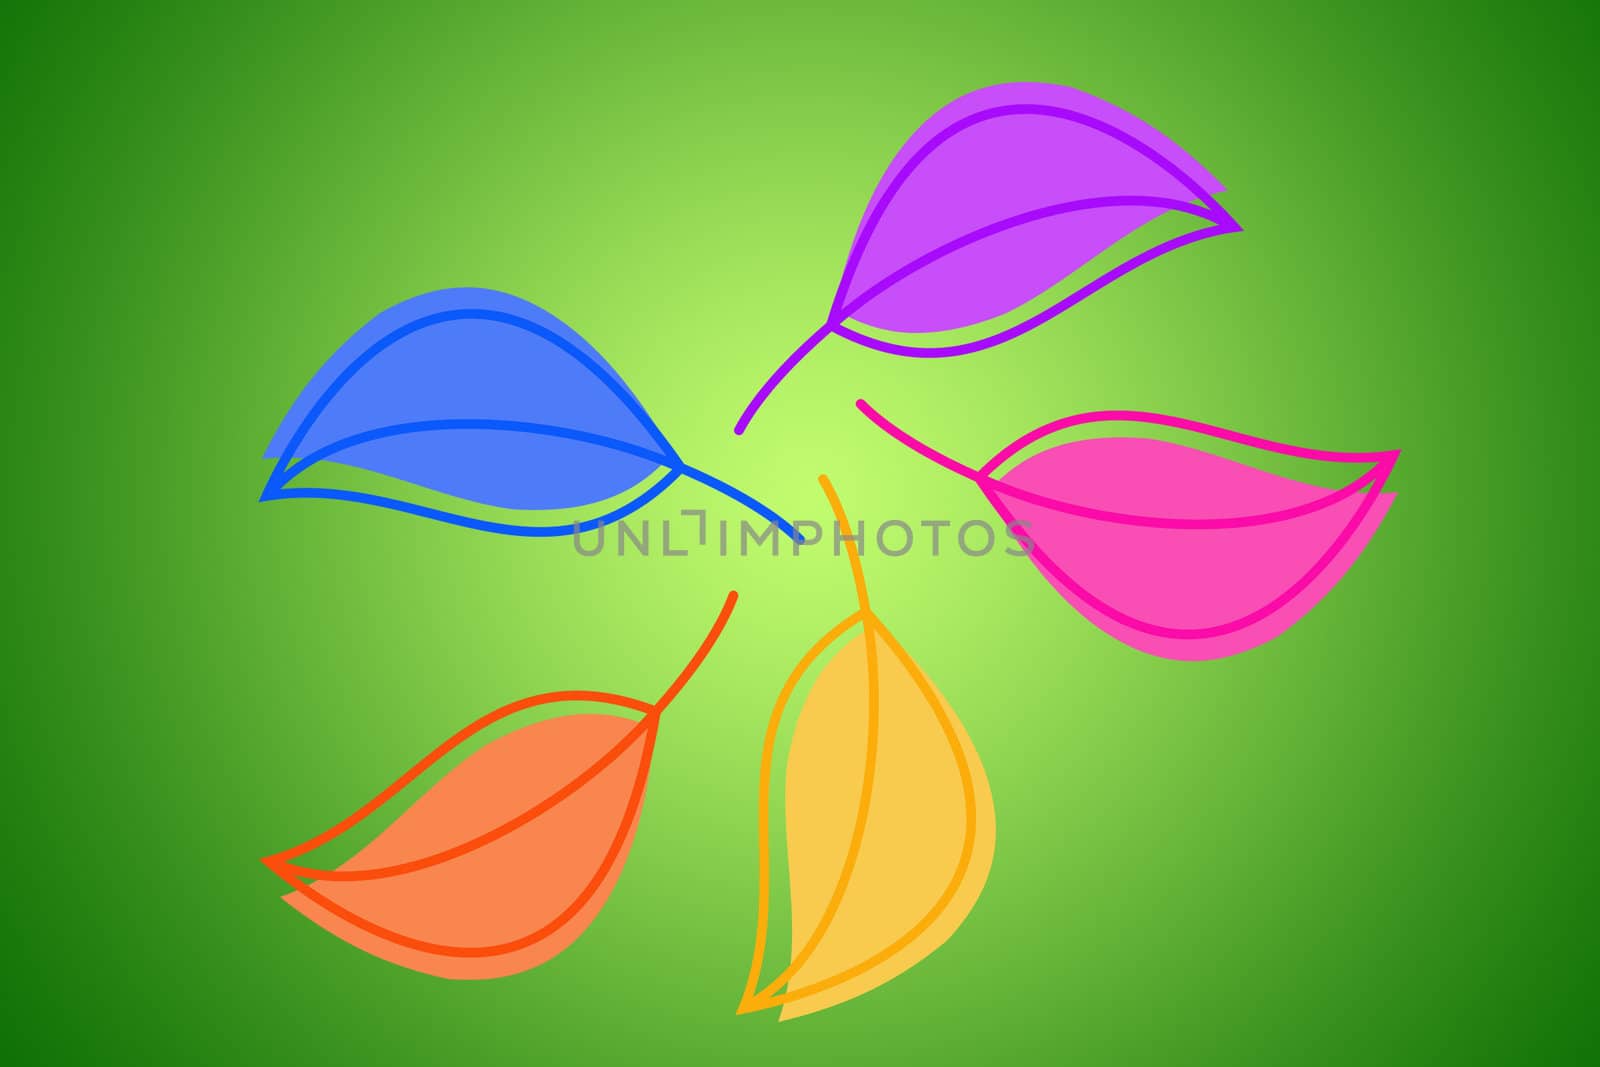 Colorful  leaves wallpaper. 